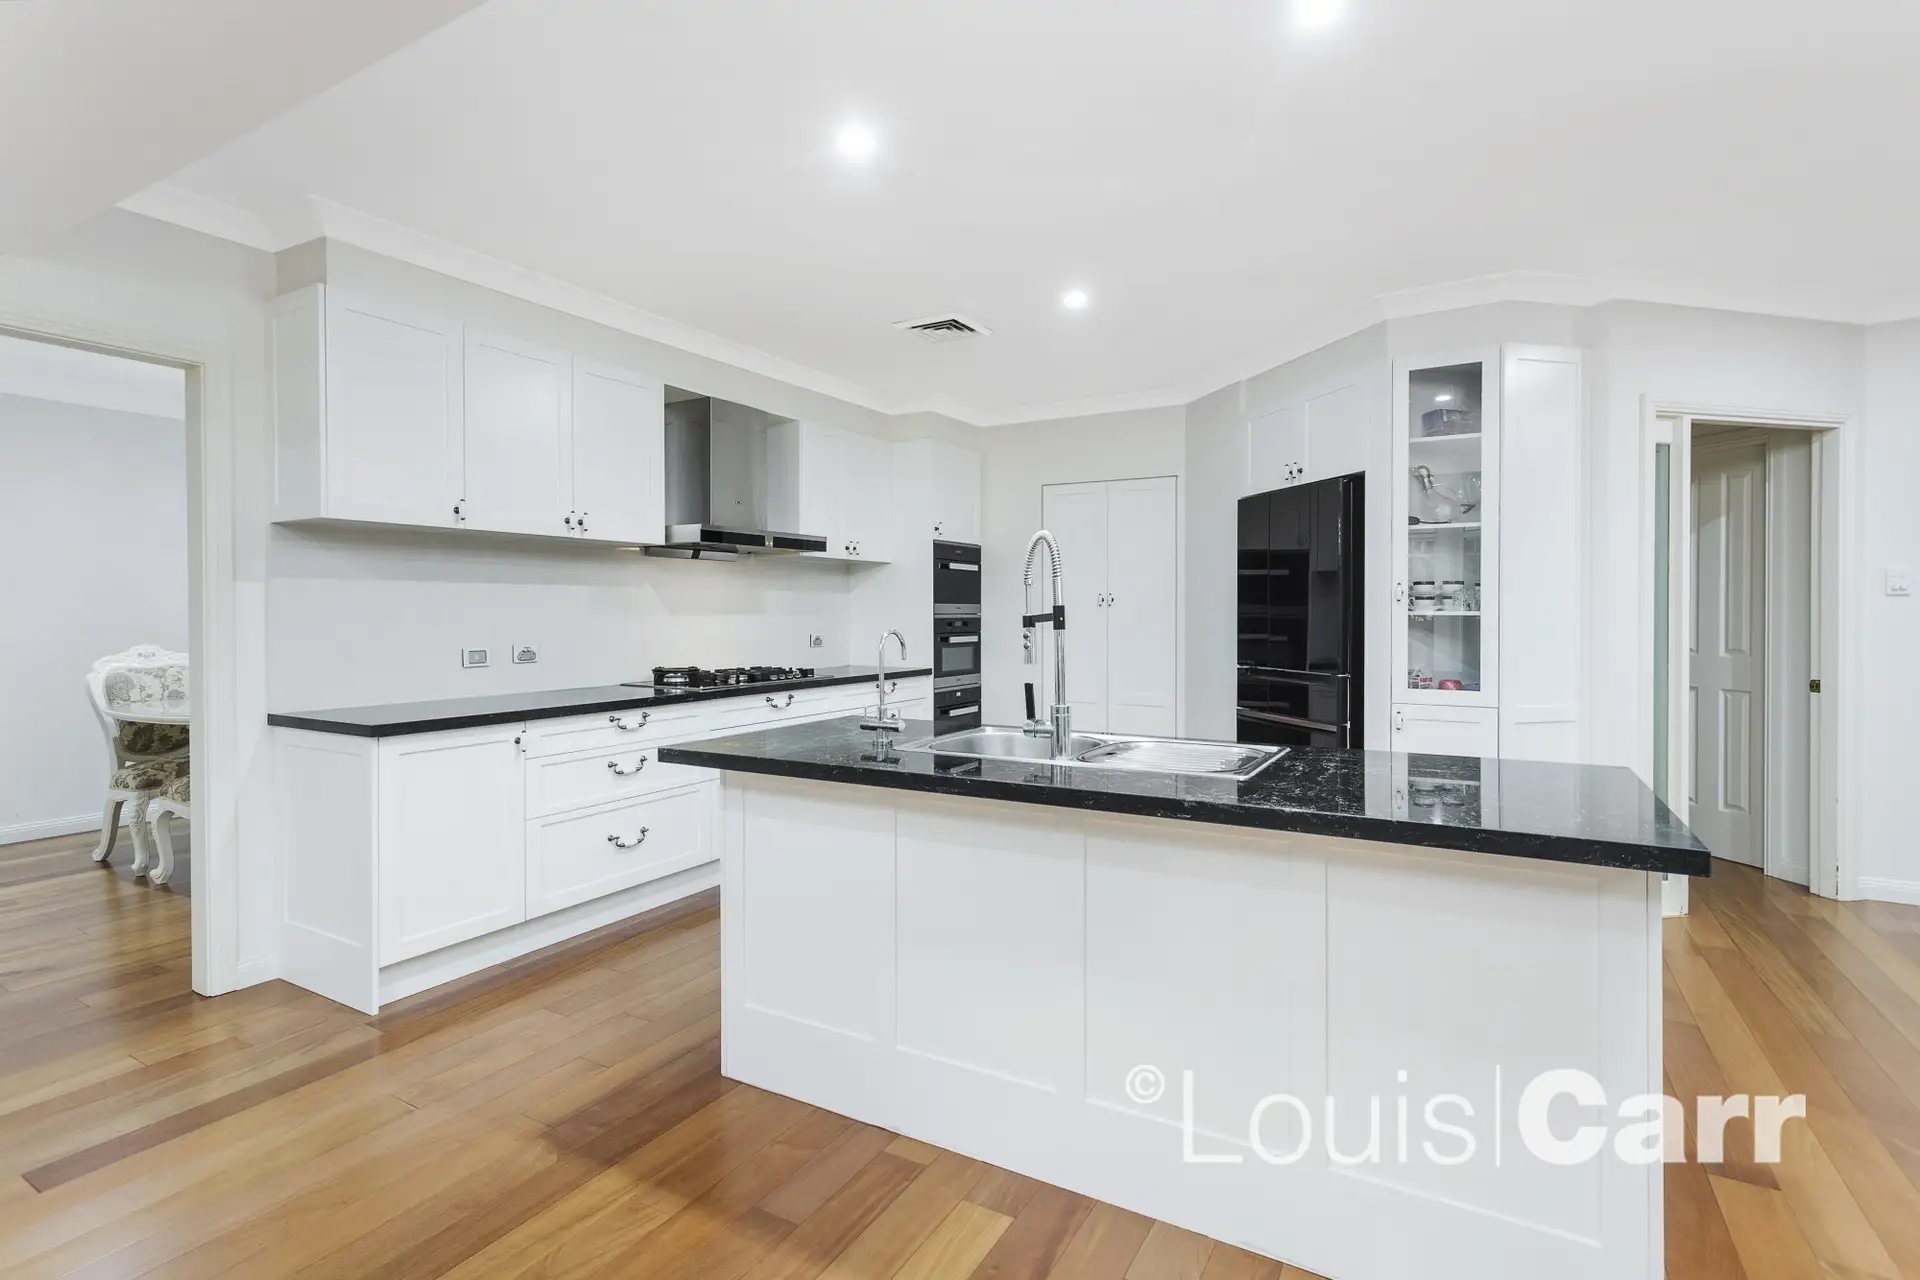 11 Lyndhurst Court, West Pennant Hills Sold by Louis Carr Real Estate - image 4